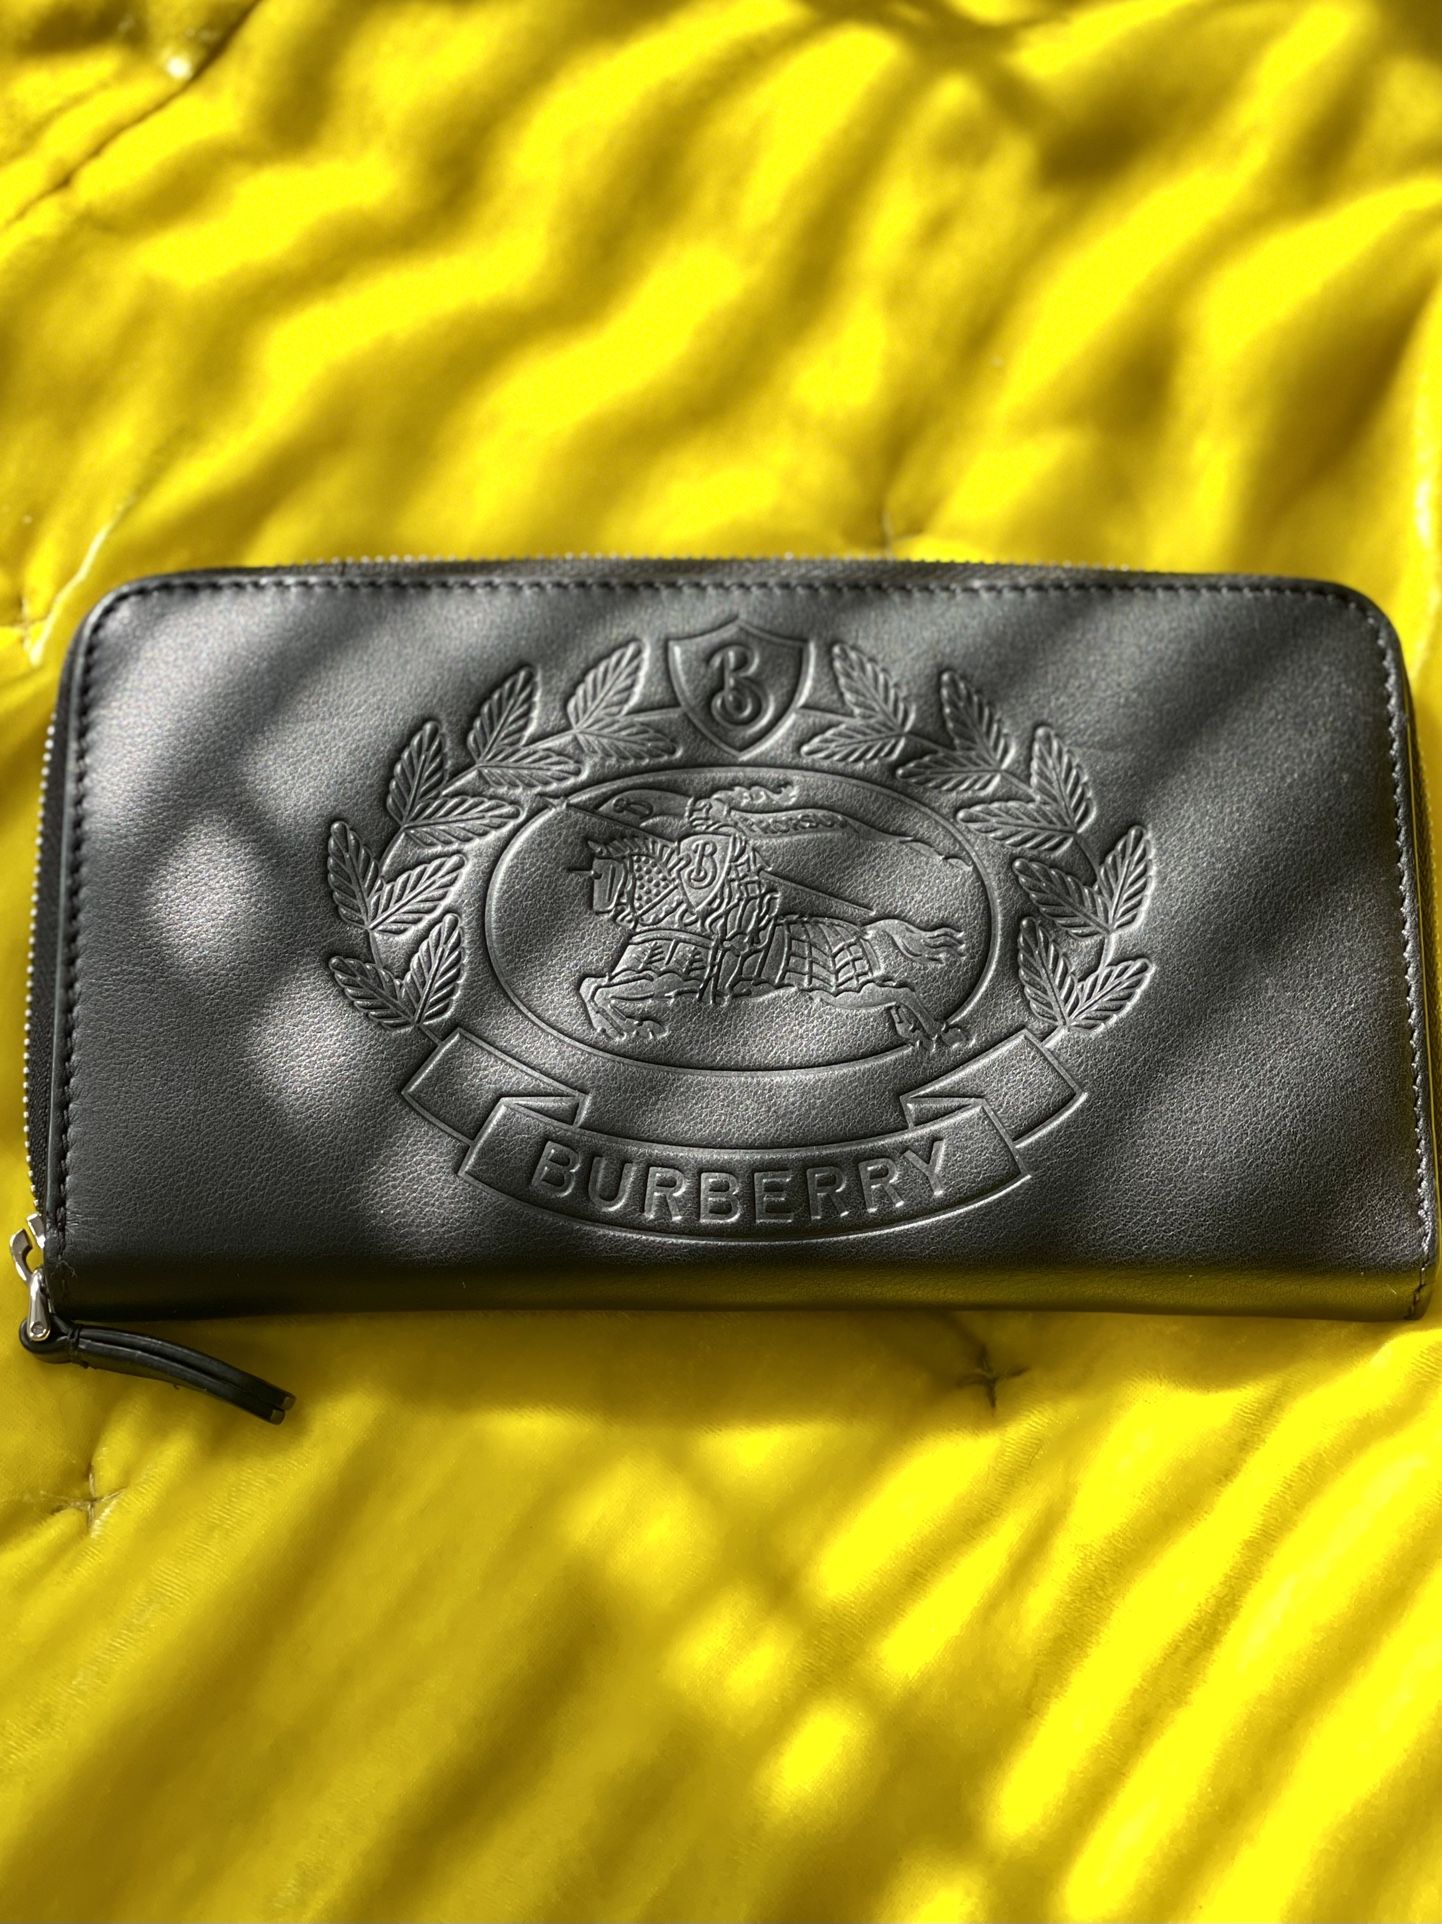 AUTHENTIC Burberry Embossed Crest Zip-around Leather Wallet